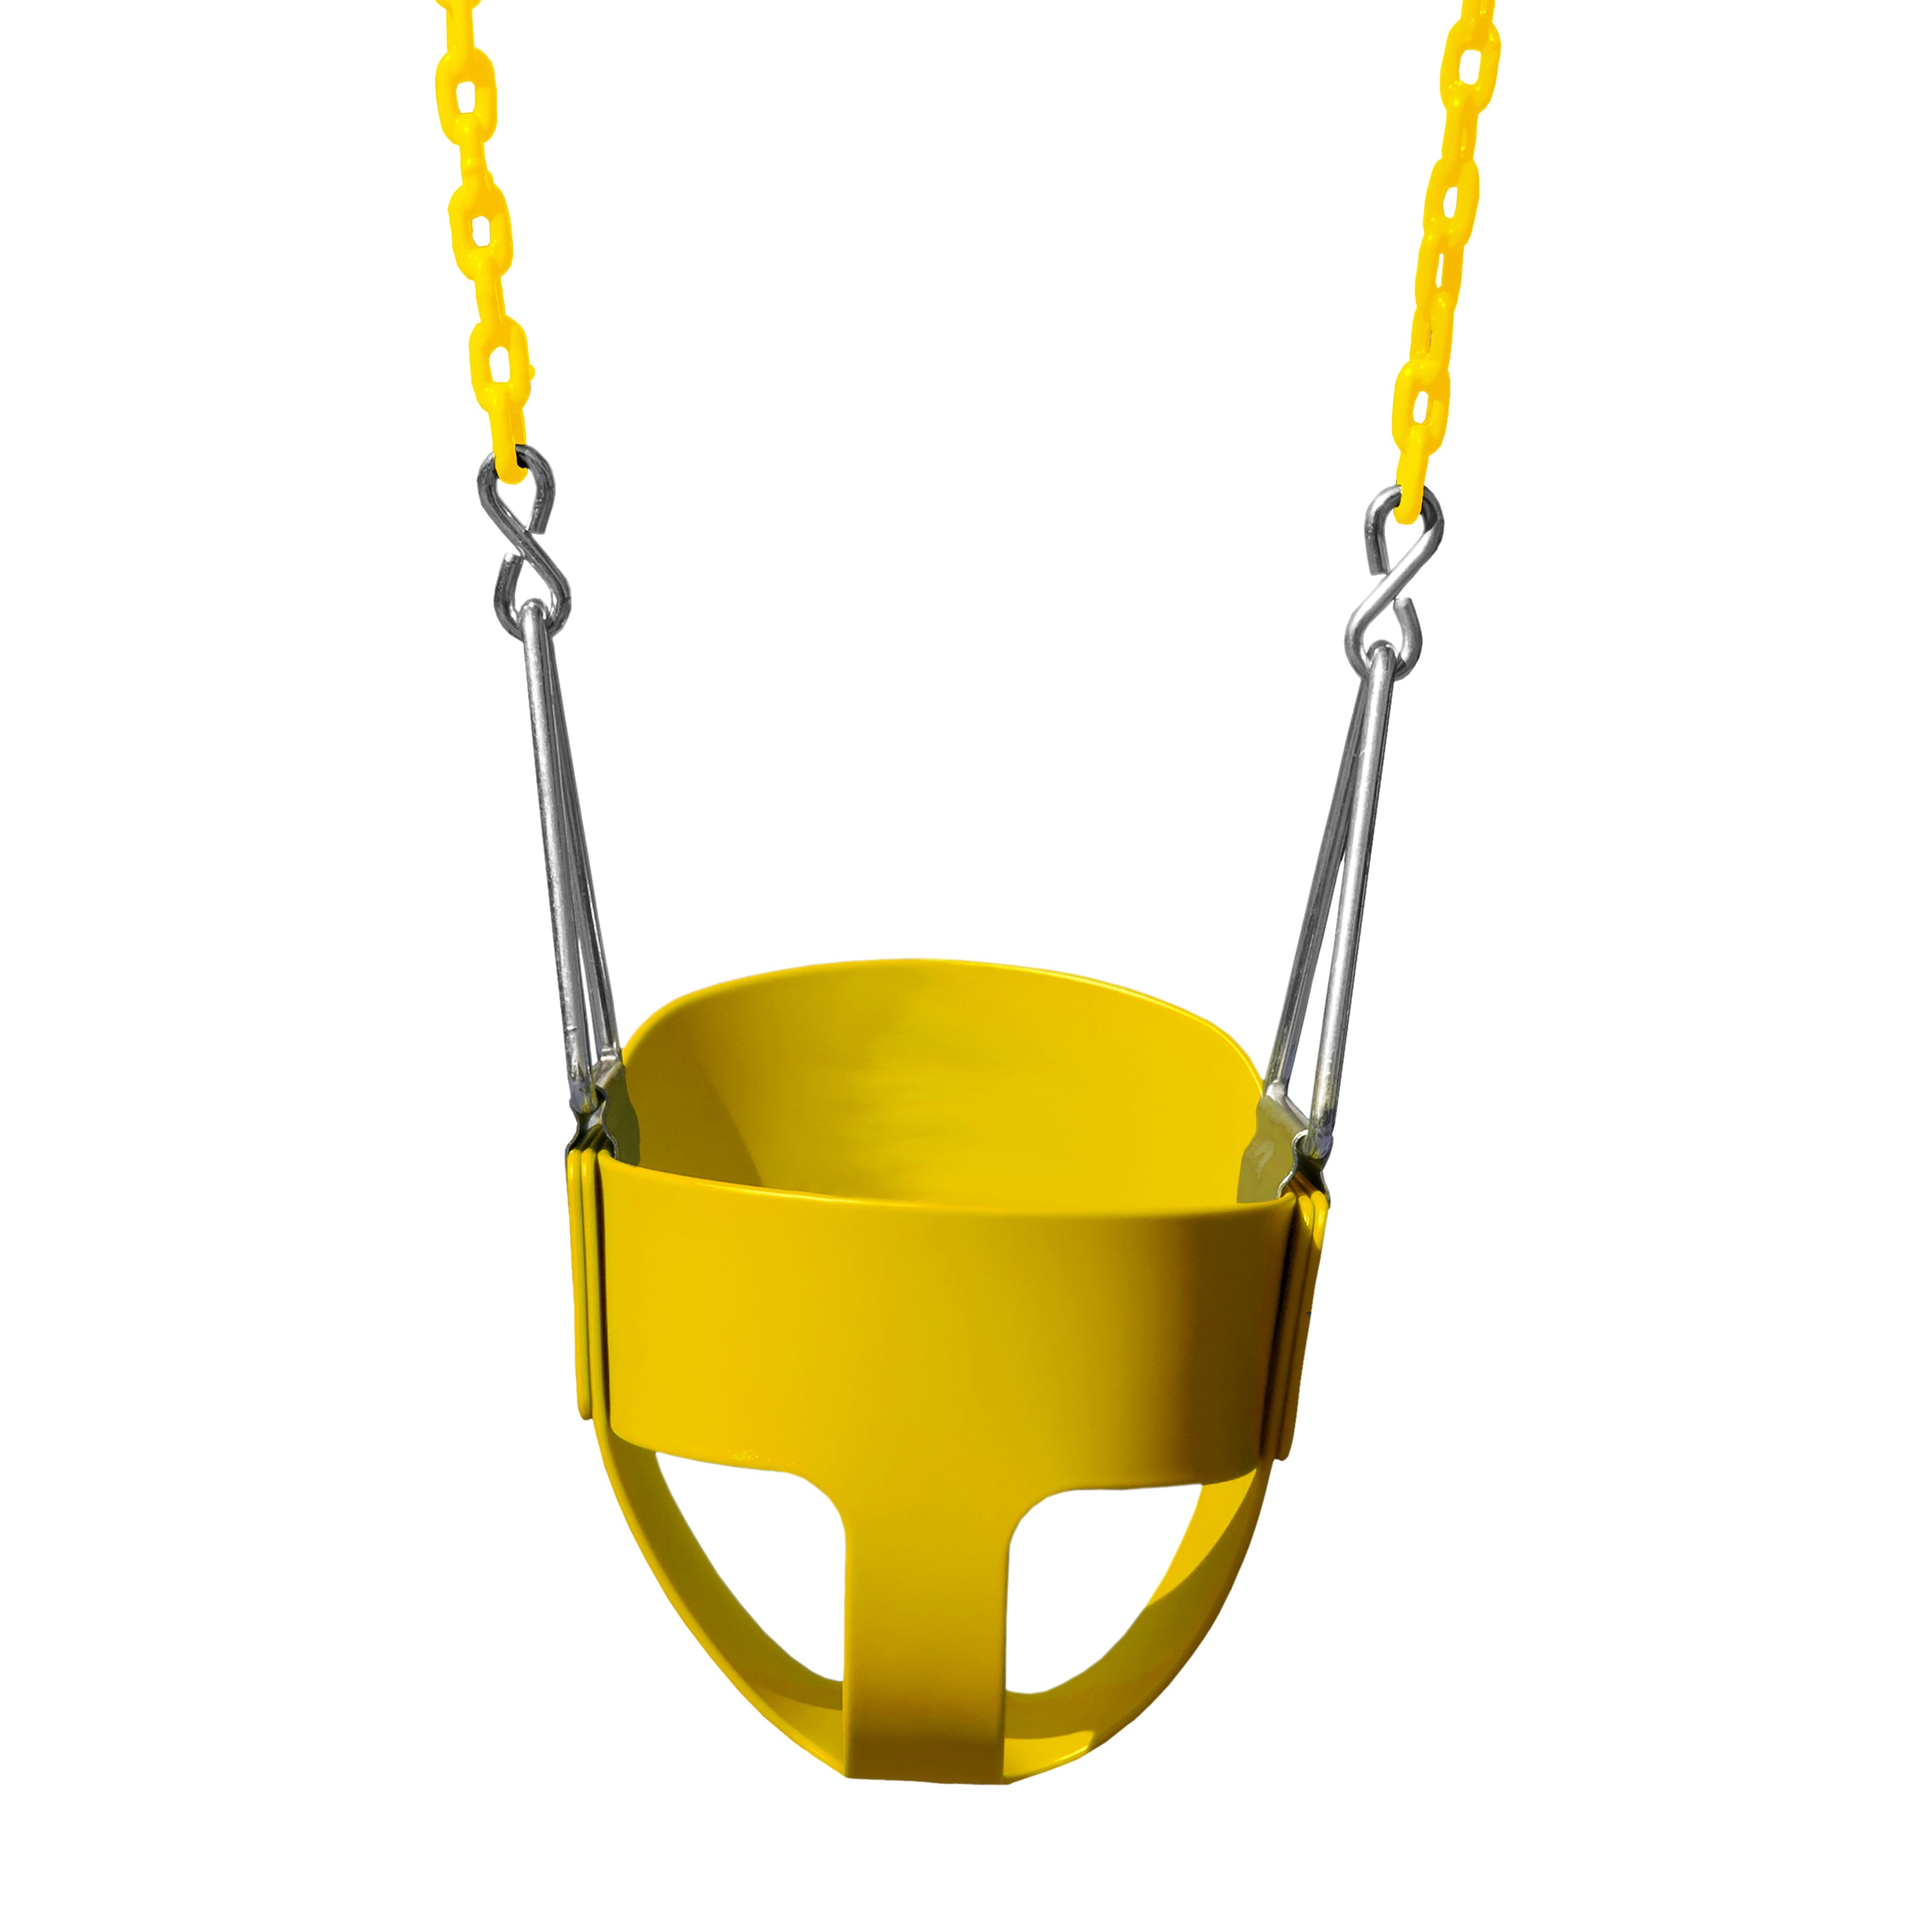 Full Bucket Seat With Chain (Green, Yellow, Blue, or Pink) | WillyGoat Playground & Park Equipment